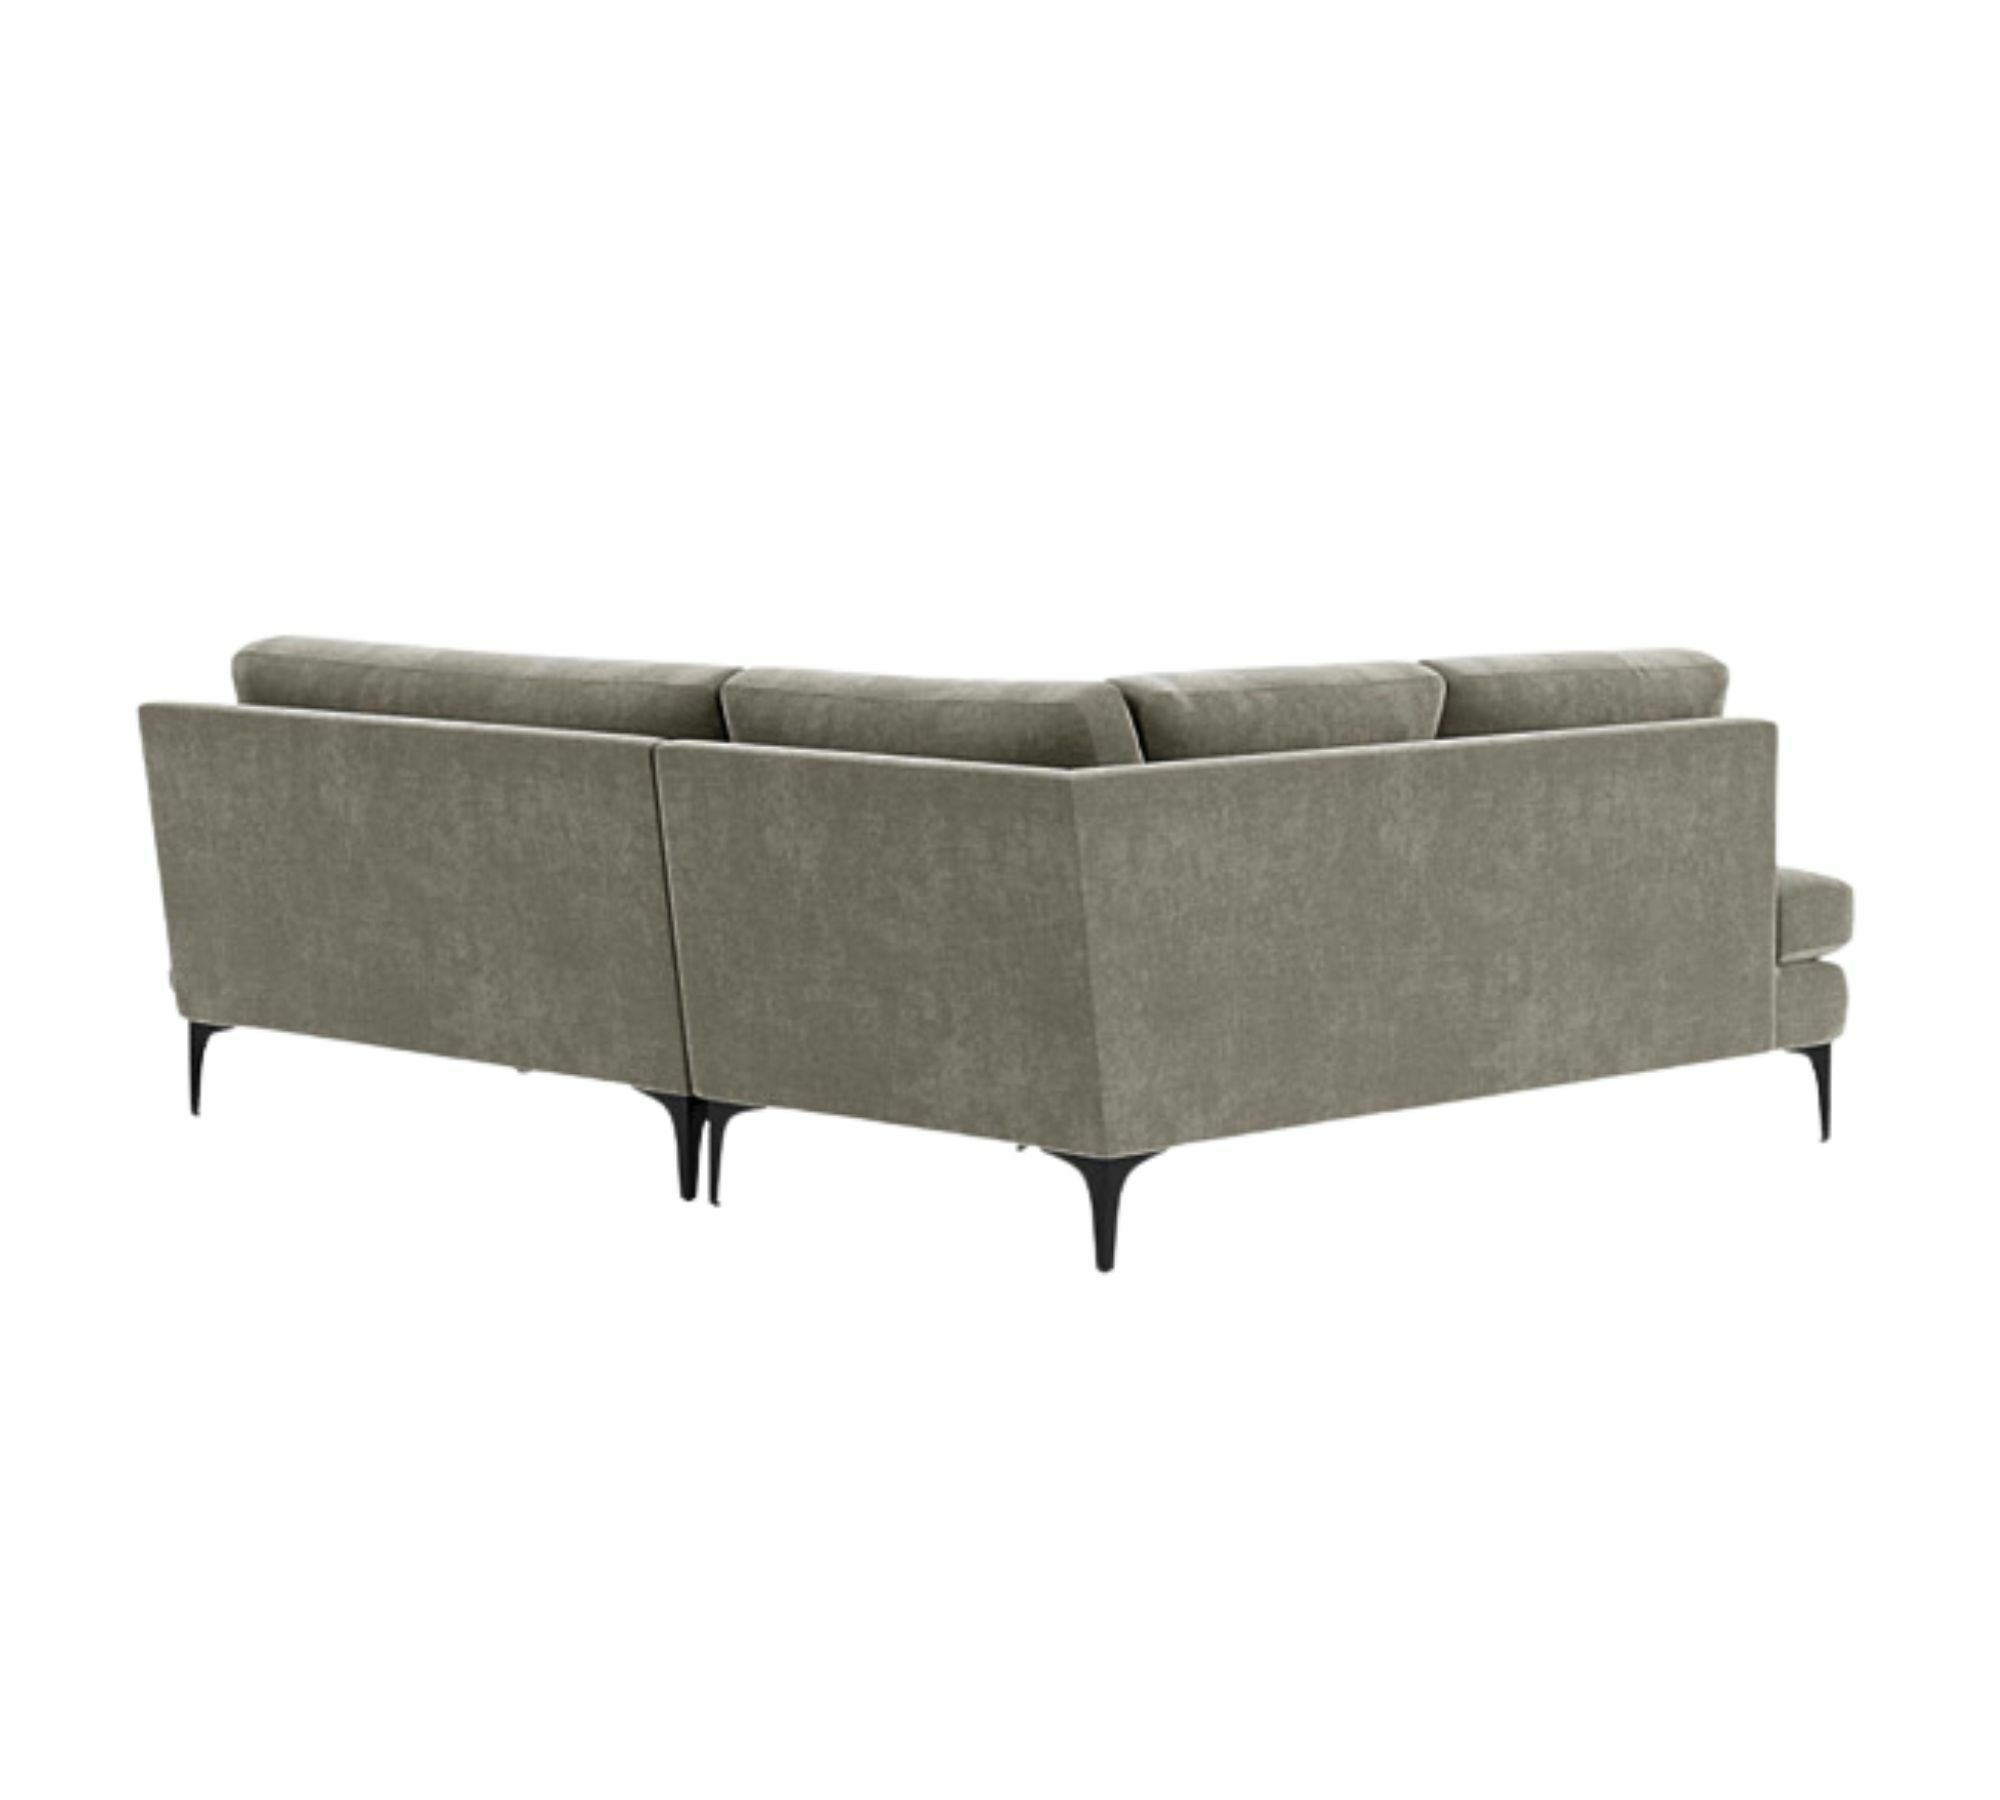 Astha Sofa Récamiere Links Planet Grey Green 4